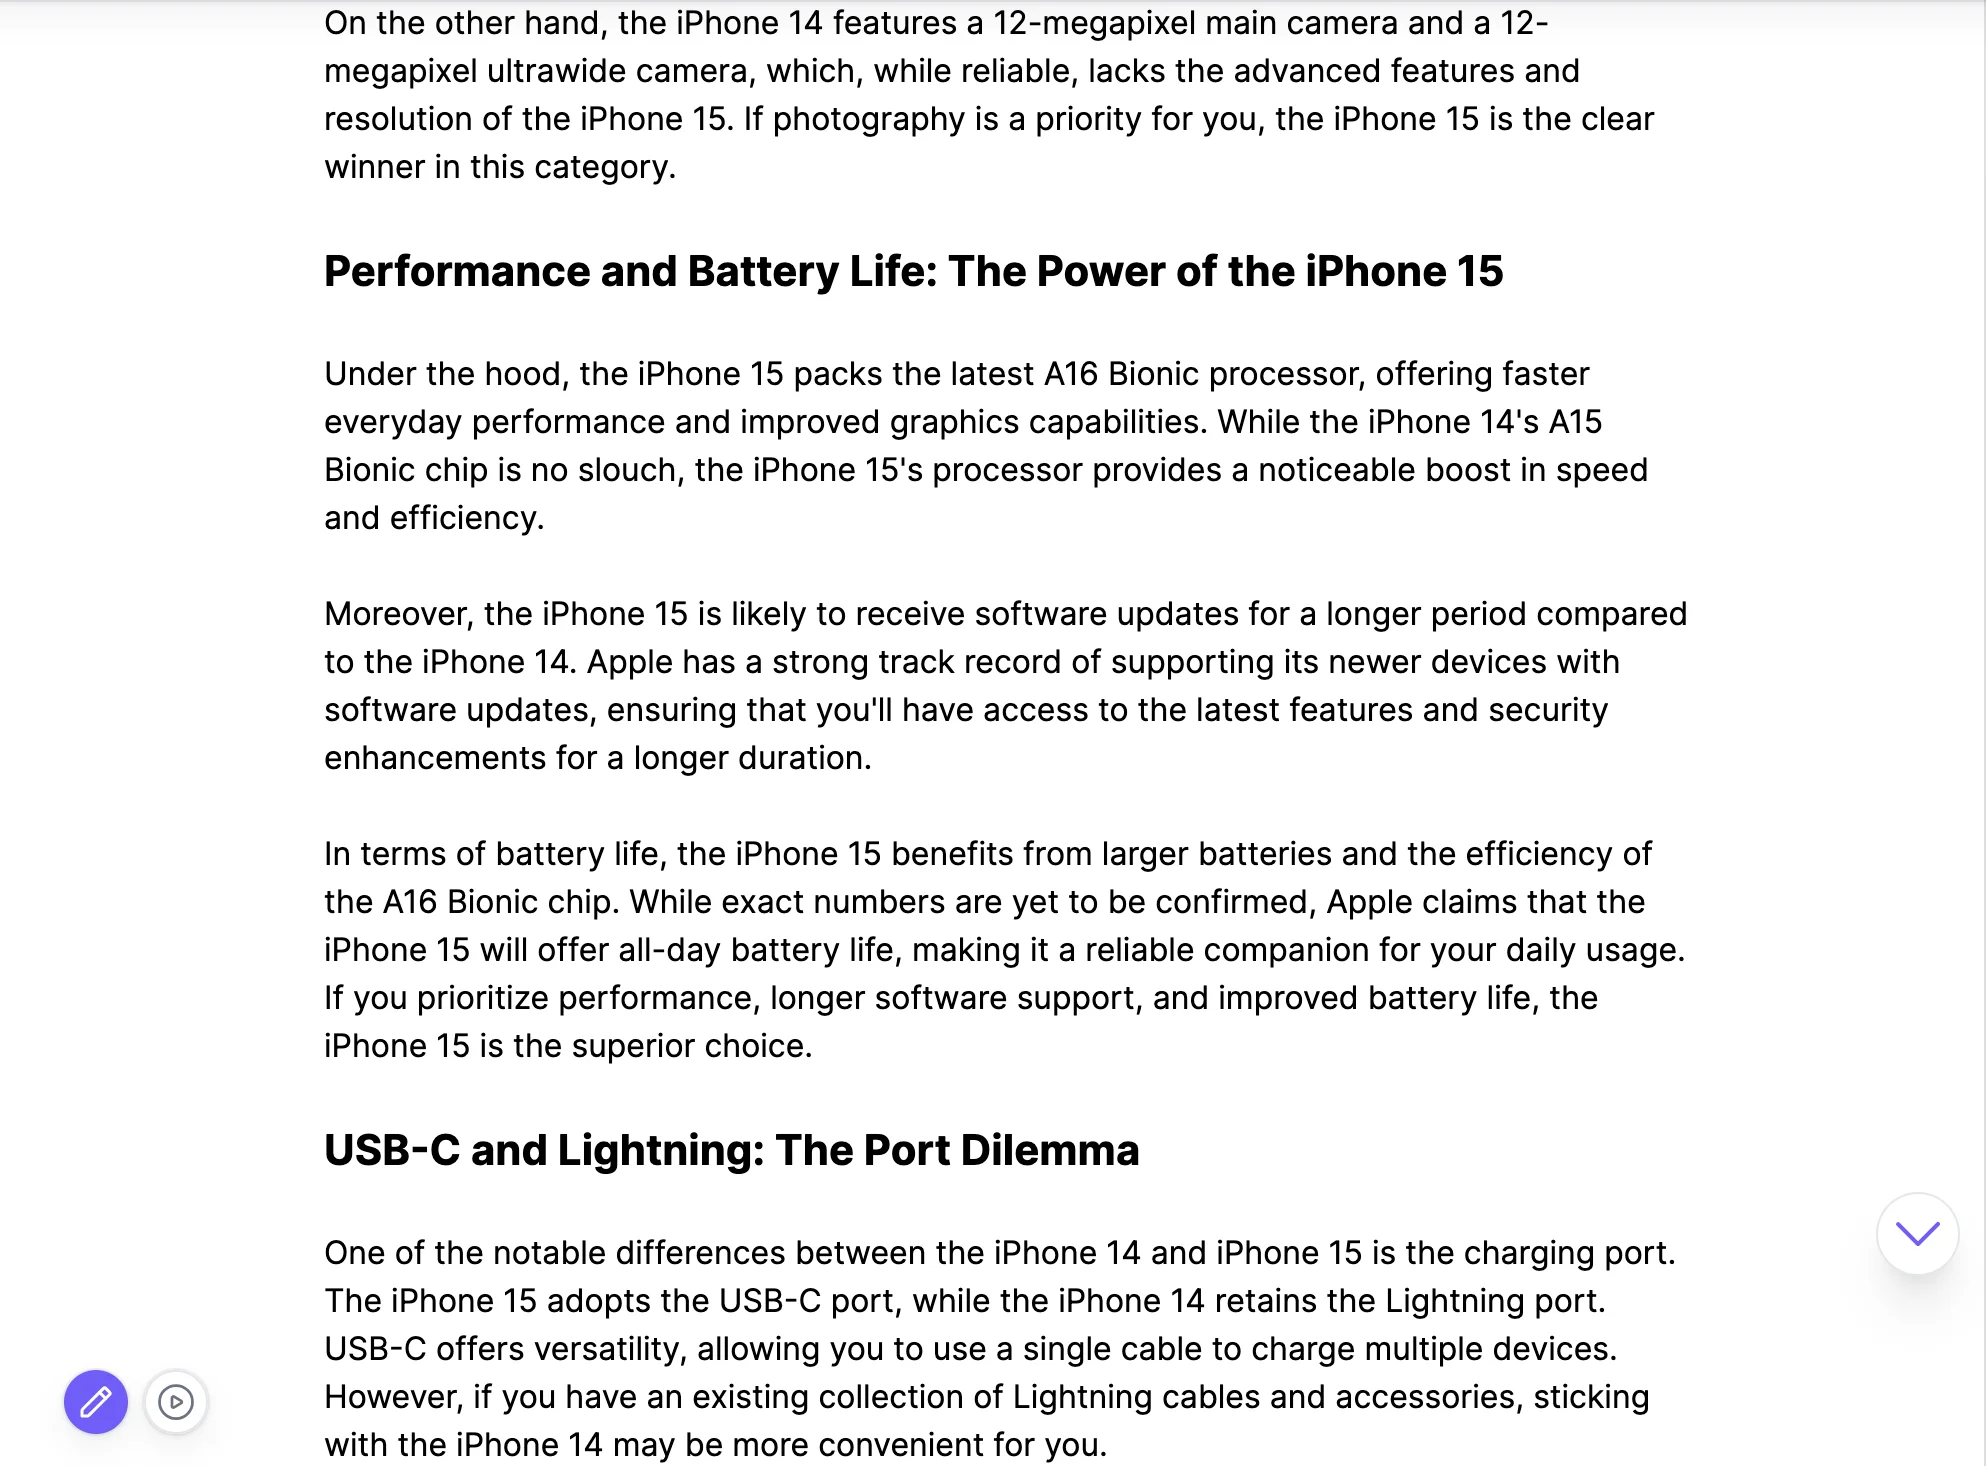 AI Article Writer Example "iPhone 14 vs iPhone 15"